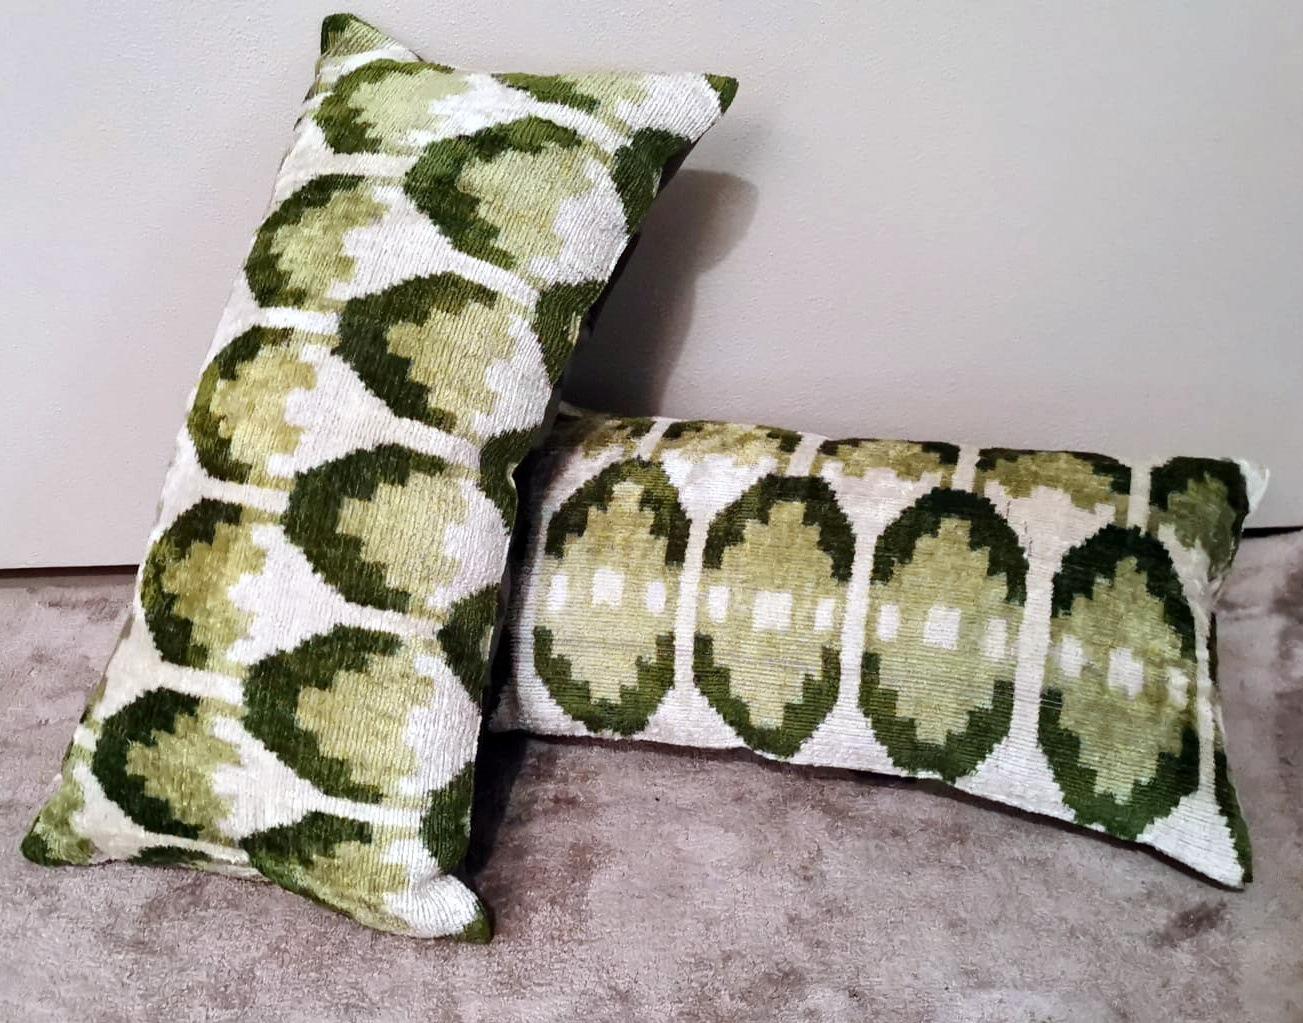  Ikat Fabric Pair Handmade Pillows In Uzbekistan In Good Condition For Sale In Prato, Tuscany